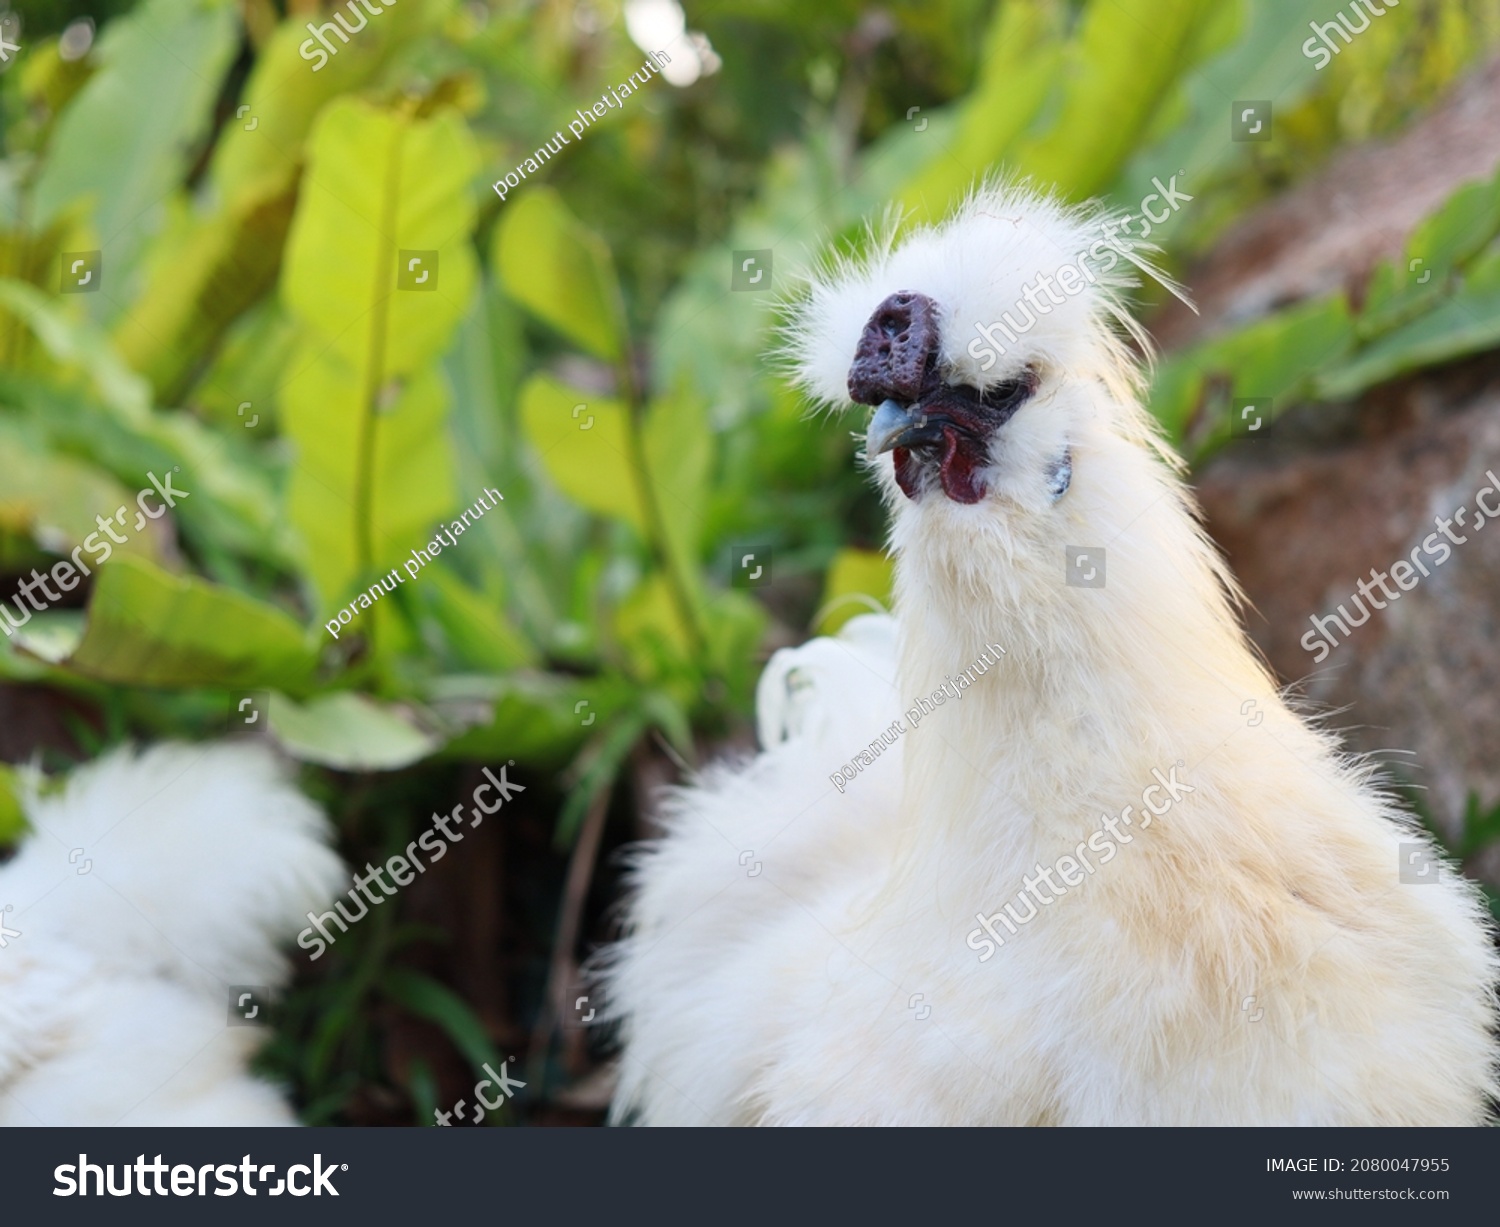 Silkie chicken: On the green grass. Silkie - an unusual breed poultry with fluffy like wool feathers and black leather. Selective focus image. #2080047955